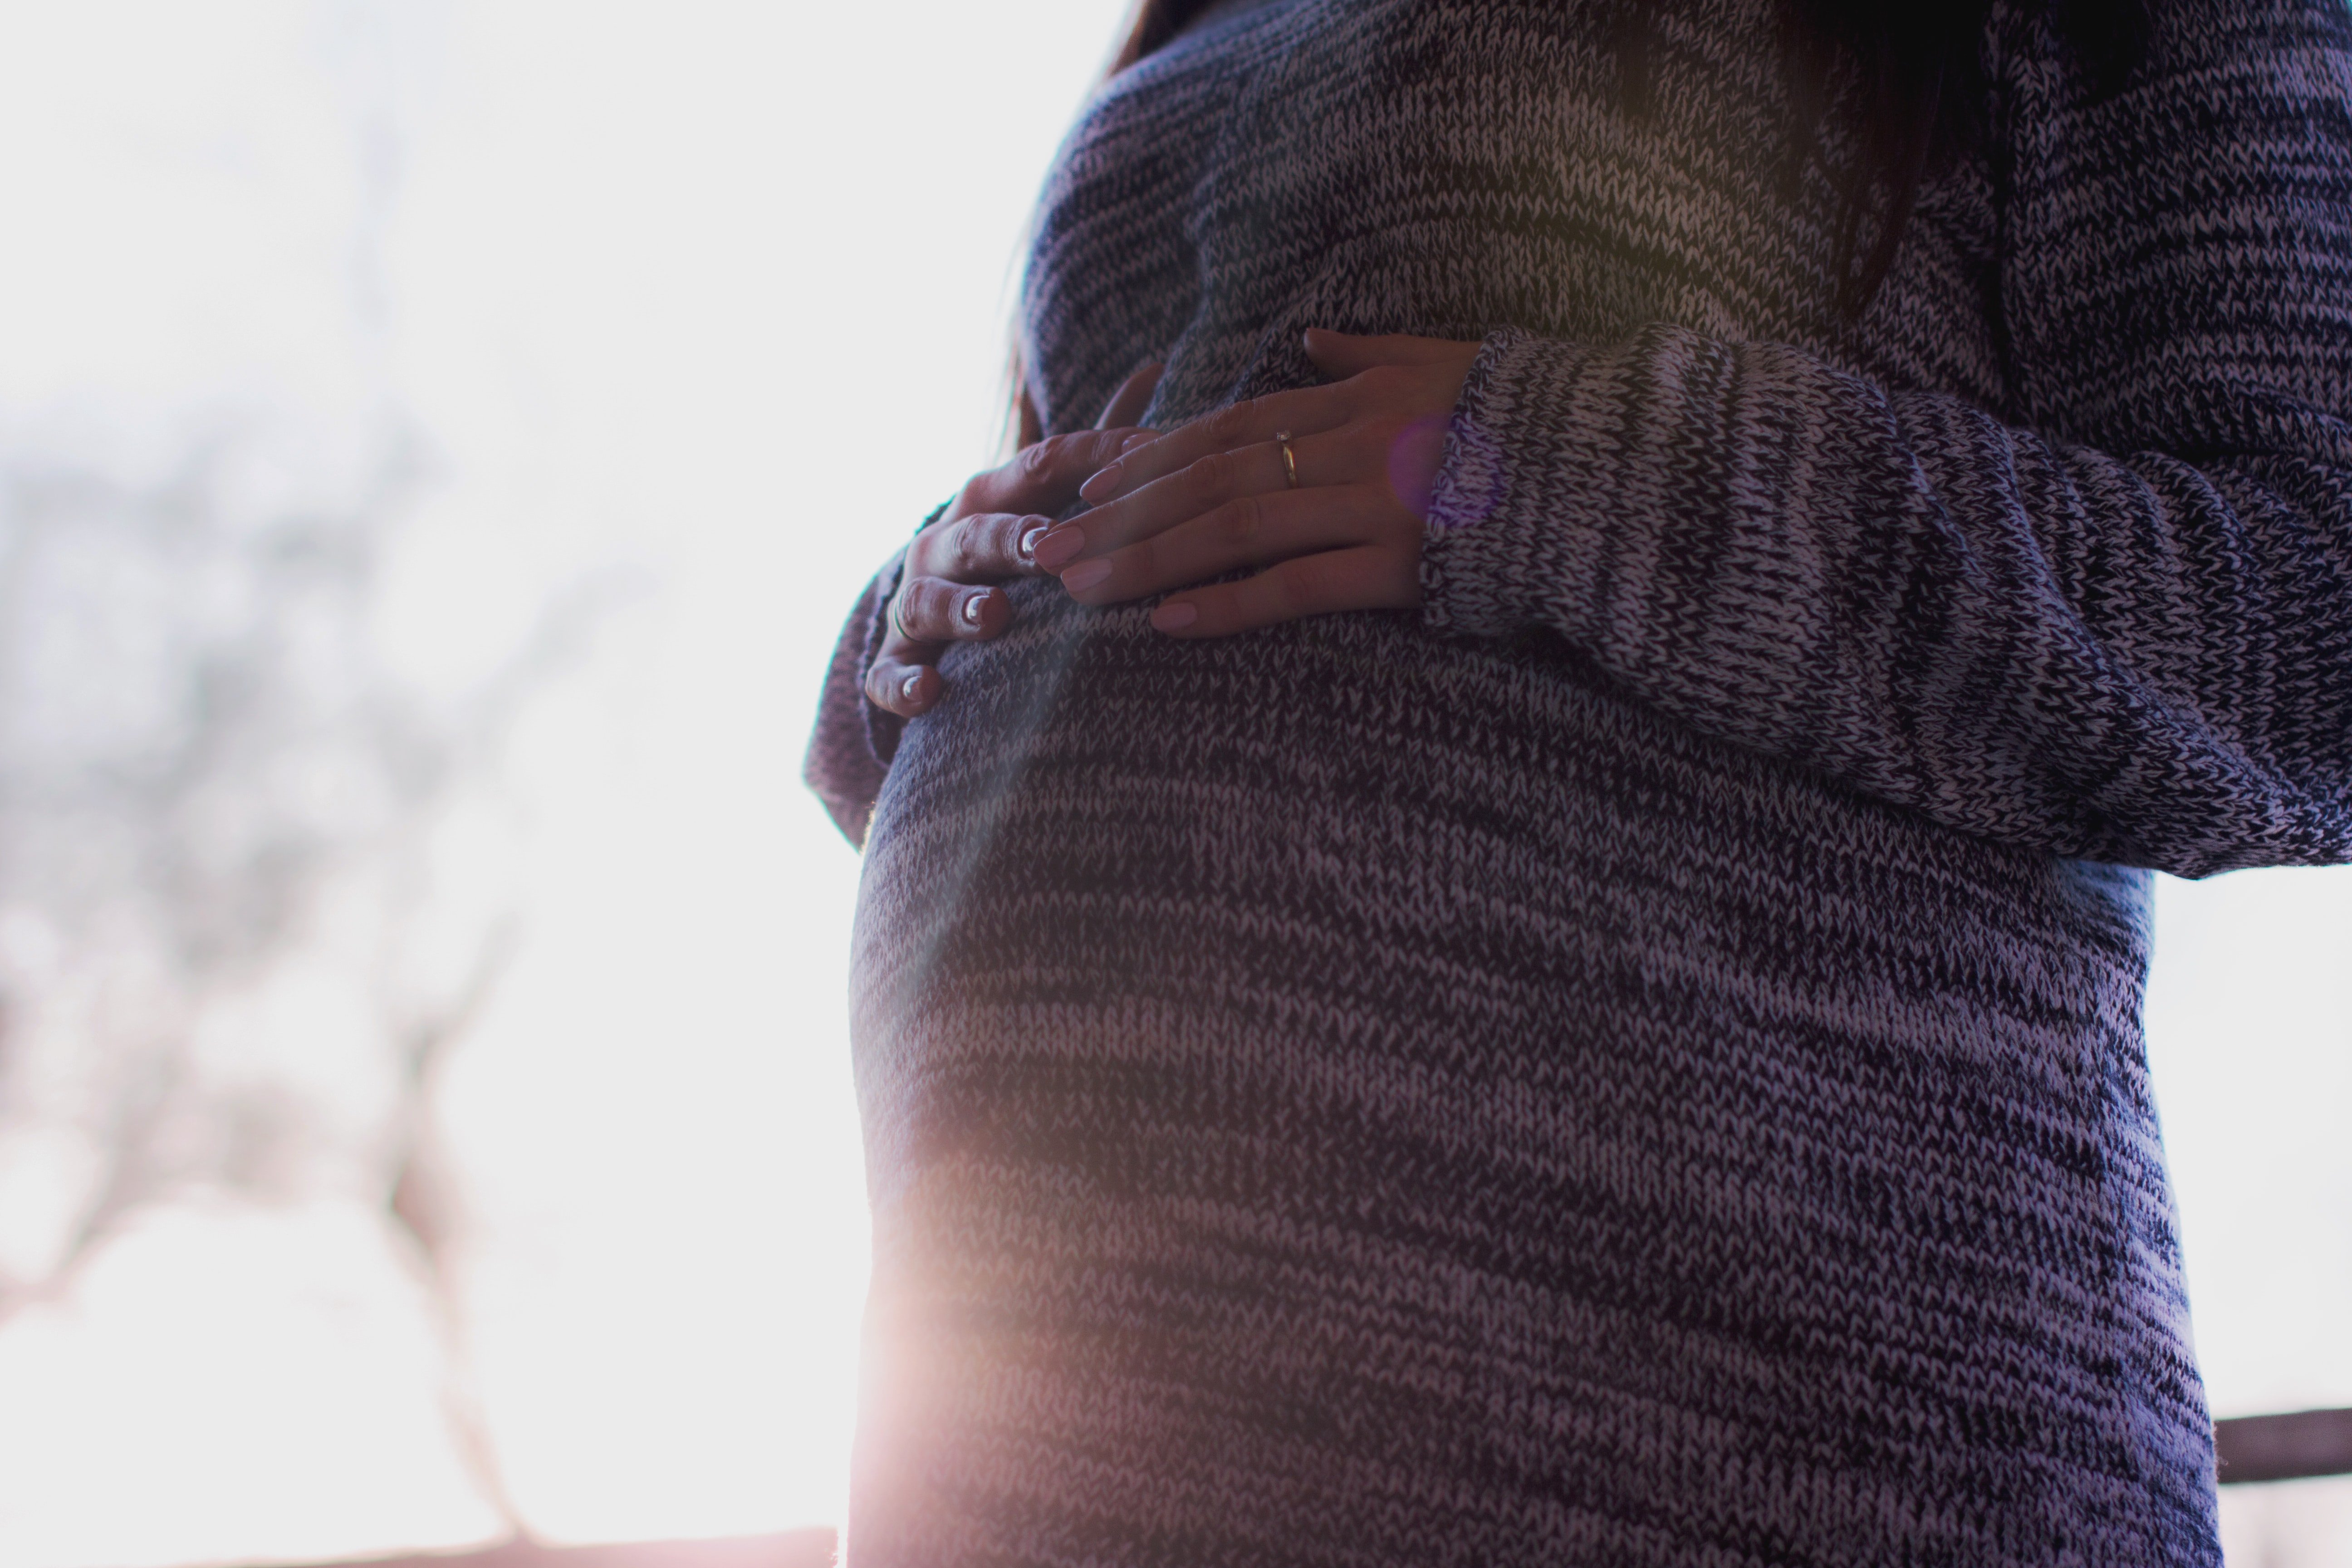 Annette held her baby bump as she told me her story. | Source: Unsplash